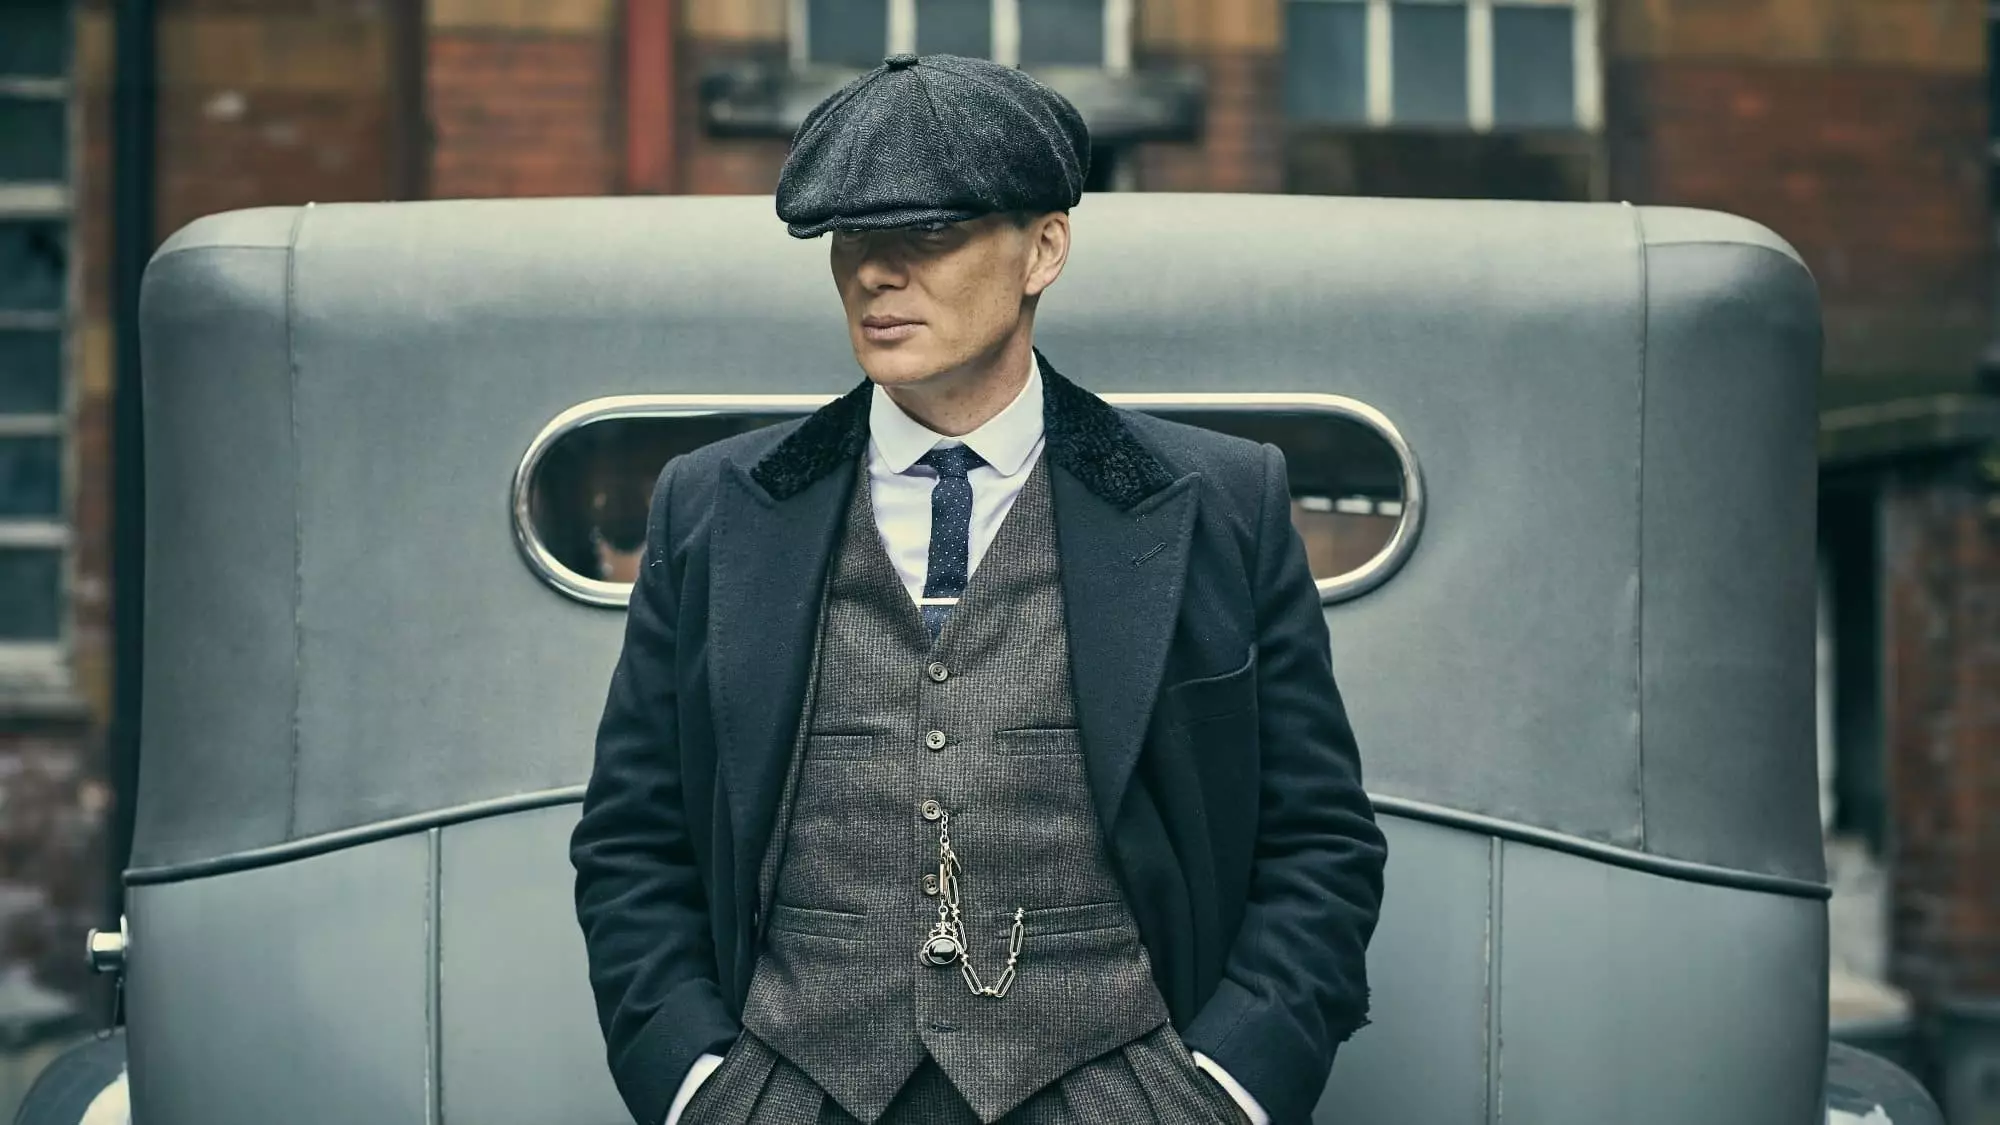 You could be standing next to Tommy Shelby himself (